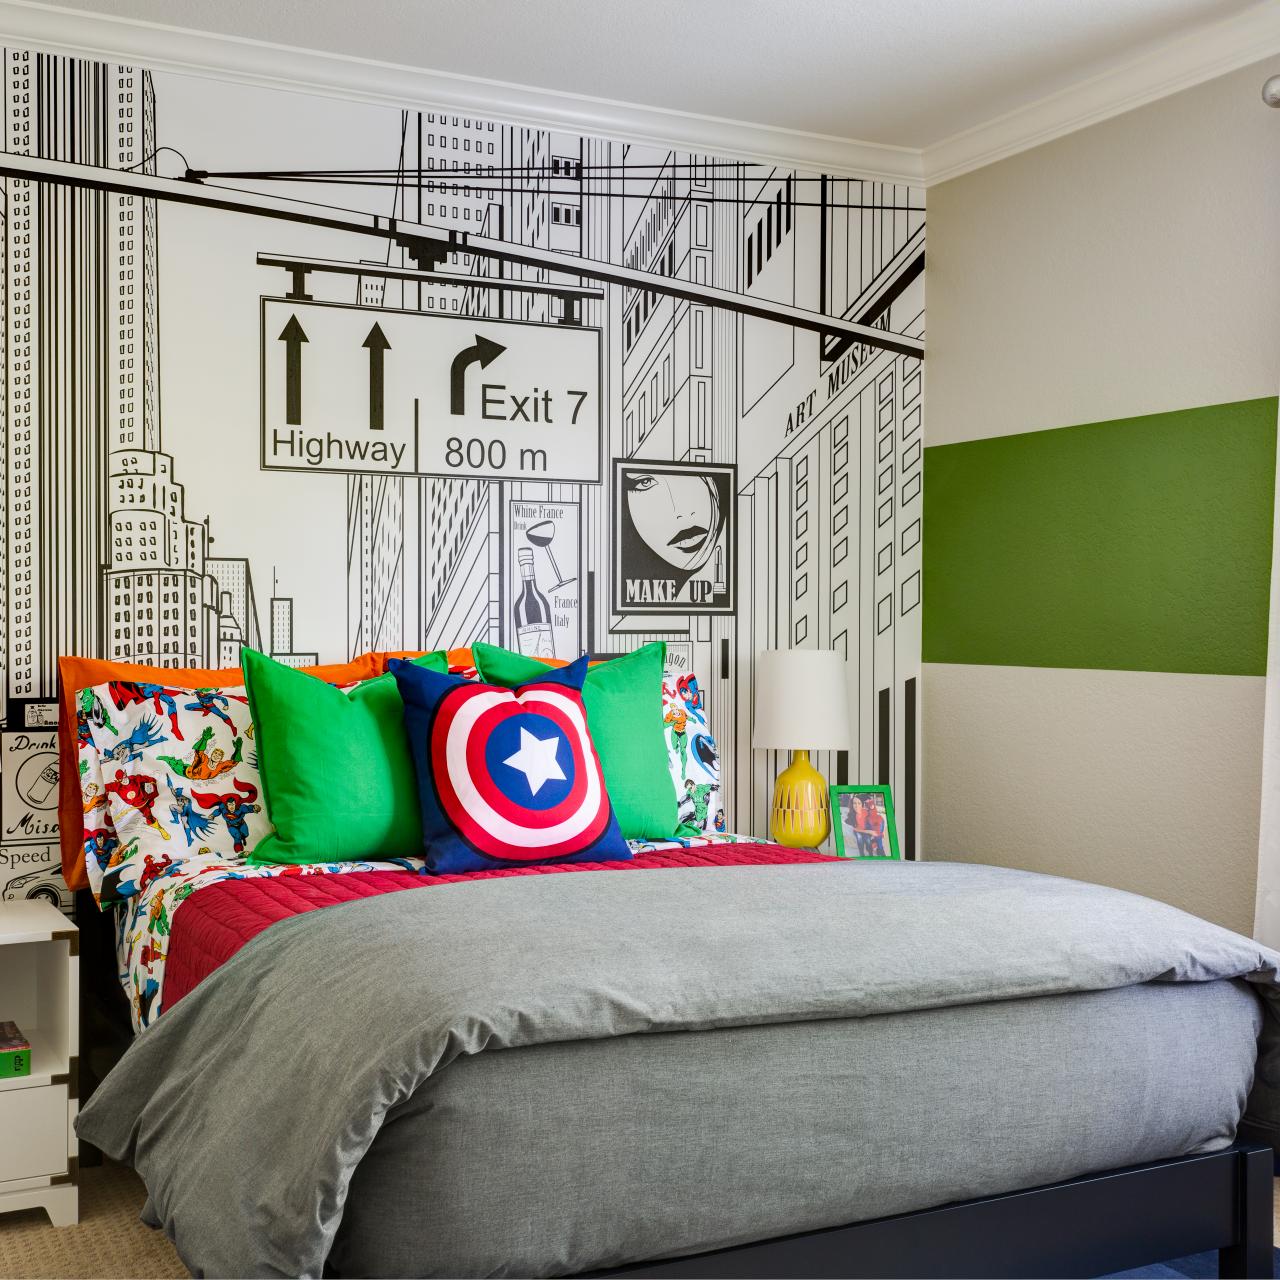 Bedroom Themes for Boys